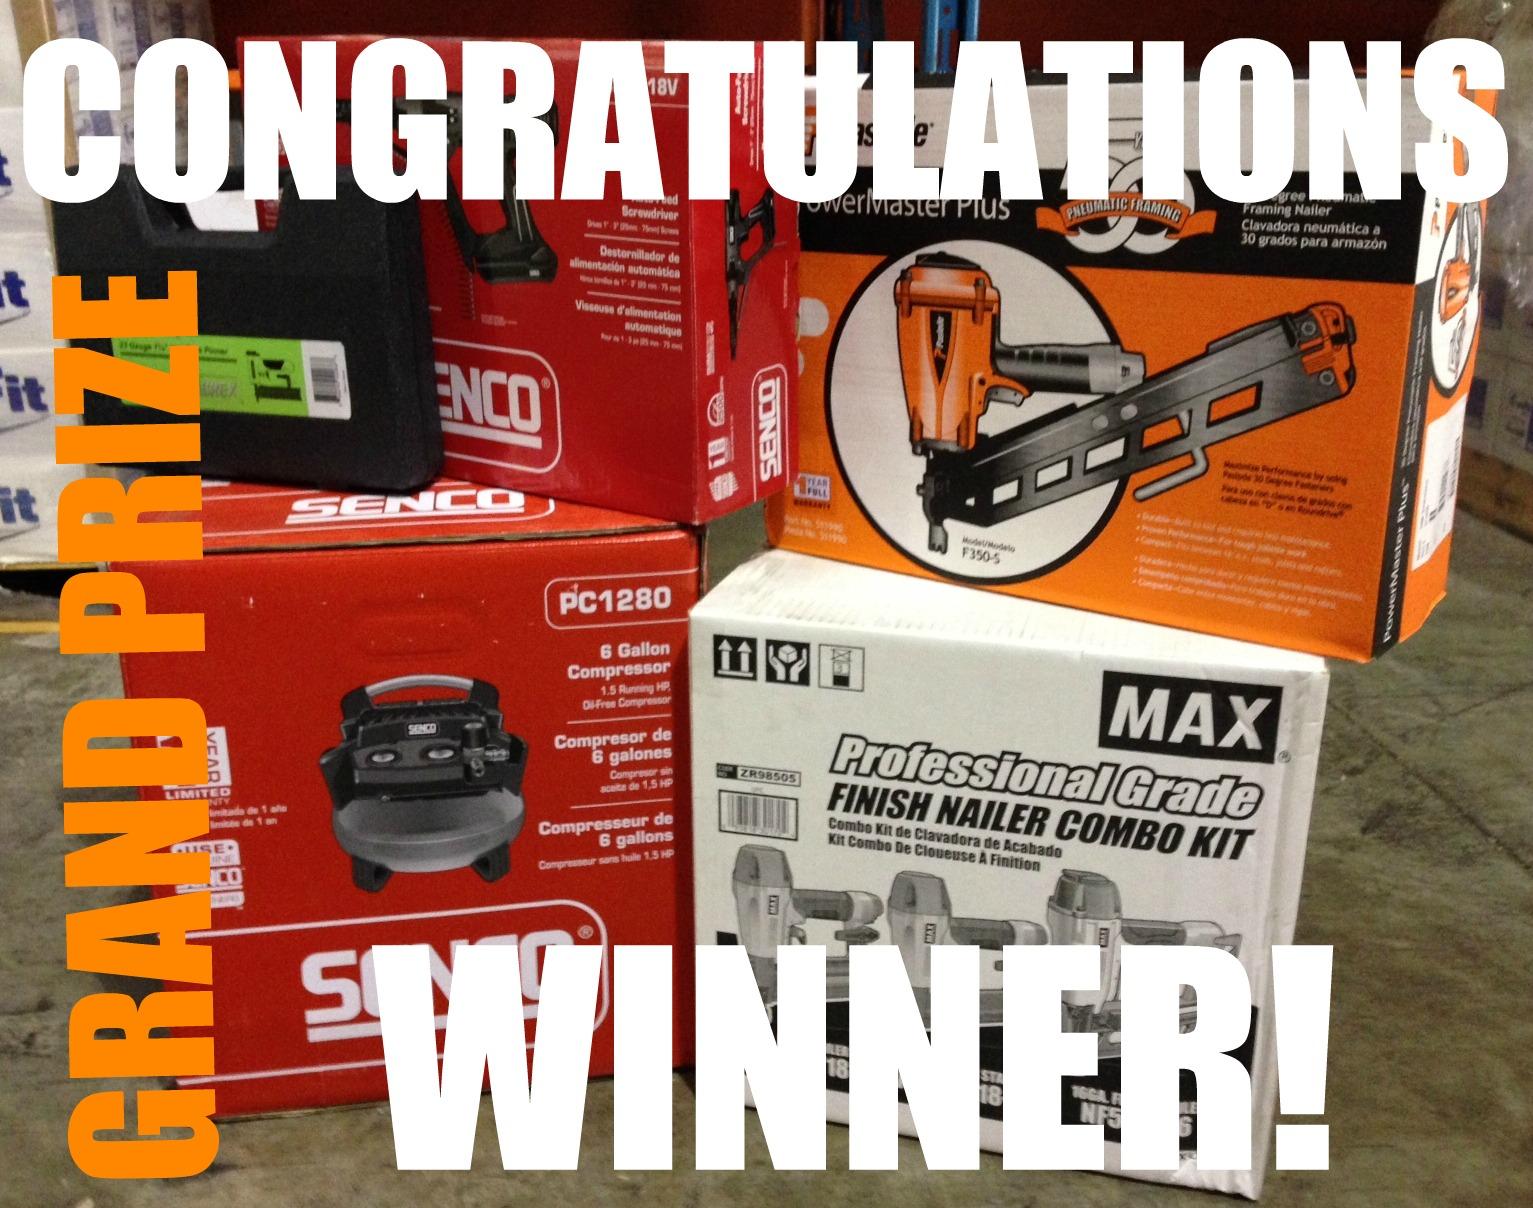 Announcing The Ultimate Construction Kit Winner!